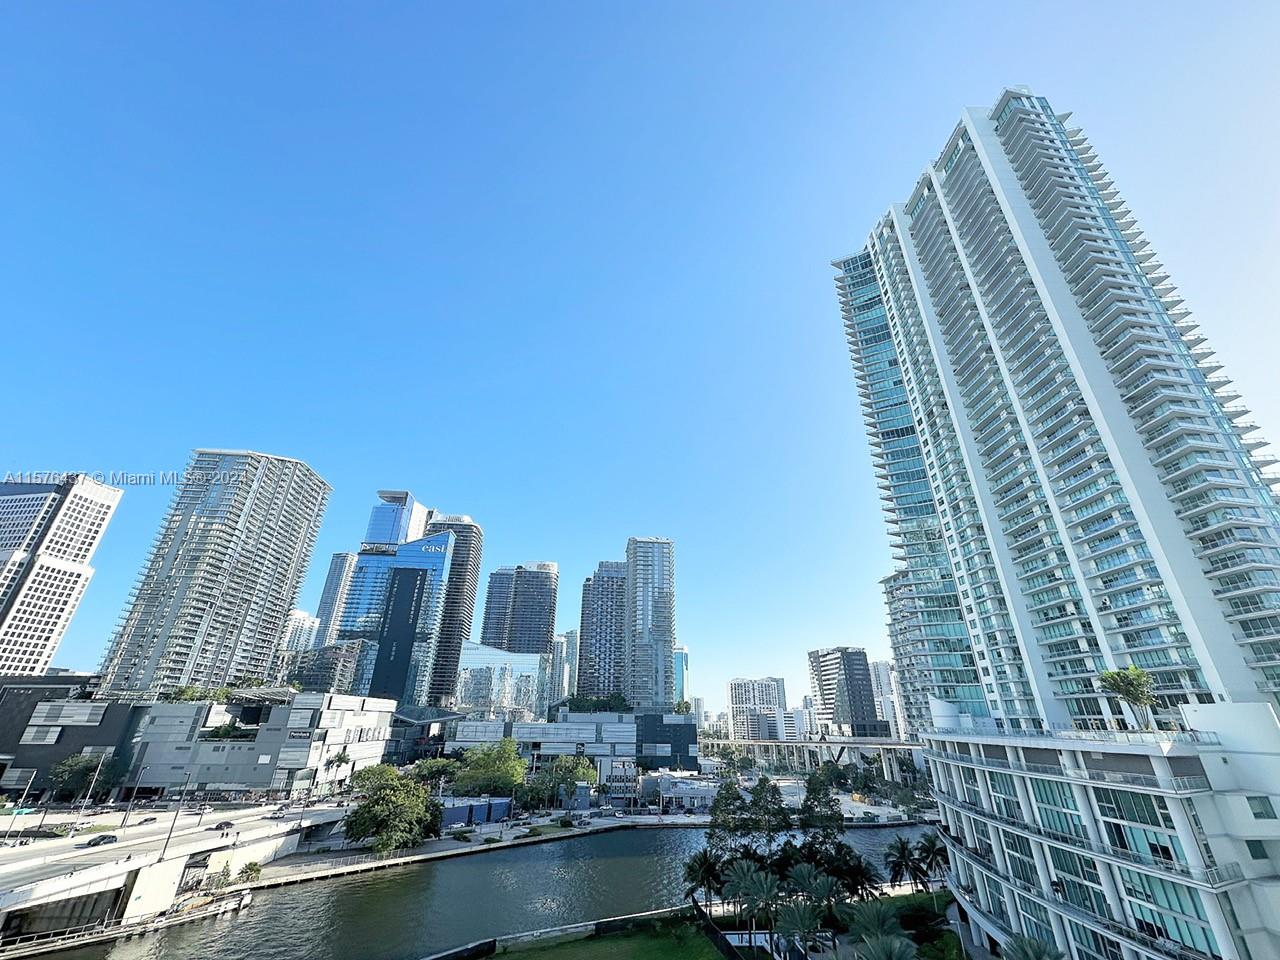 ***INCREDIBLE!!***PRIME DOWNTOWN/BRICKELL LOCATION!!!***PREMIER WIND CONDO LUXURY LIVING AT ITS BEST!!***EASY WALK TO RENOWN CITY CENTRE!!***THIS UNIT HAS IT ALL: AMAZING VIEWS, SPACIOUS LIVING ROOM WITH SEPARATE DINING AREA AND LARGE BEDROOM, TOP OF THE LINE FINISHES PLUS HIGH CEILINGS AND GETS A LOT OF LIGHT!!****LARGE ONE BEDROOM ONE BATH!!!***AMAZING CITY AND RIVER VIEWS!** *UNIT OFFERS HIGH END KITCHEN!!***TOP OF THE LINE APPLIANCES!***HUGE BALCONY!!**POOL, GYM, SPA, DOORMAN, LOUNGE, PARKING, AND MORE!!!*** STEPS AWAY FROM WHOLE FOODS, BAYFRONT PARK AND THE RIVER/WATERFRONT!!! GREAT INVESTMENT OPORTUNITY **** CABLE AND WIFI INTERNET ADDITIONAL $175 A MONTH.